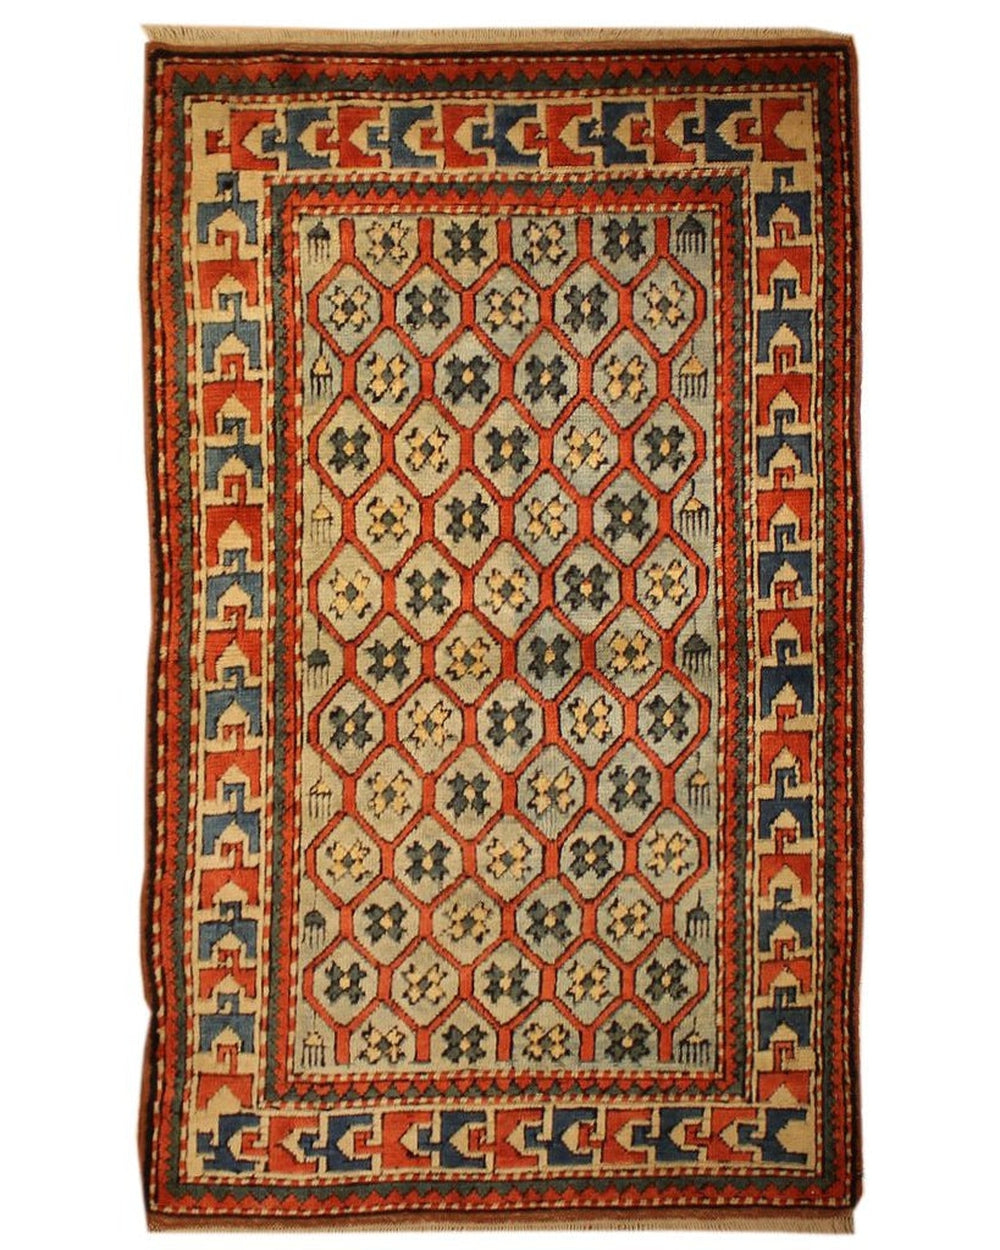 Area rug for living space and any room. Floor decor, rugs and carpets from Tabrizi Rugs. Milas - 3'3